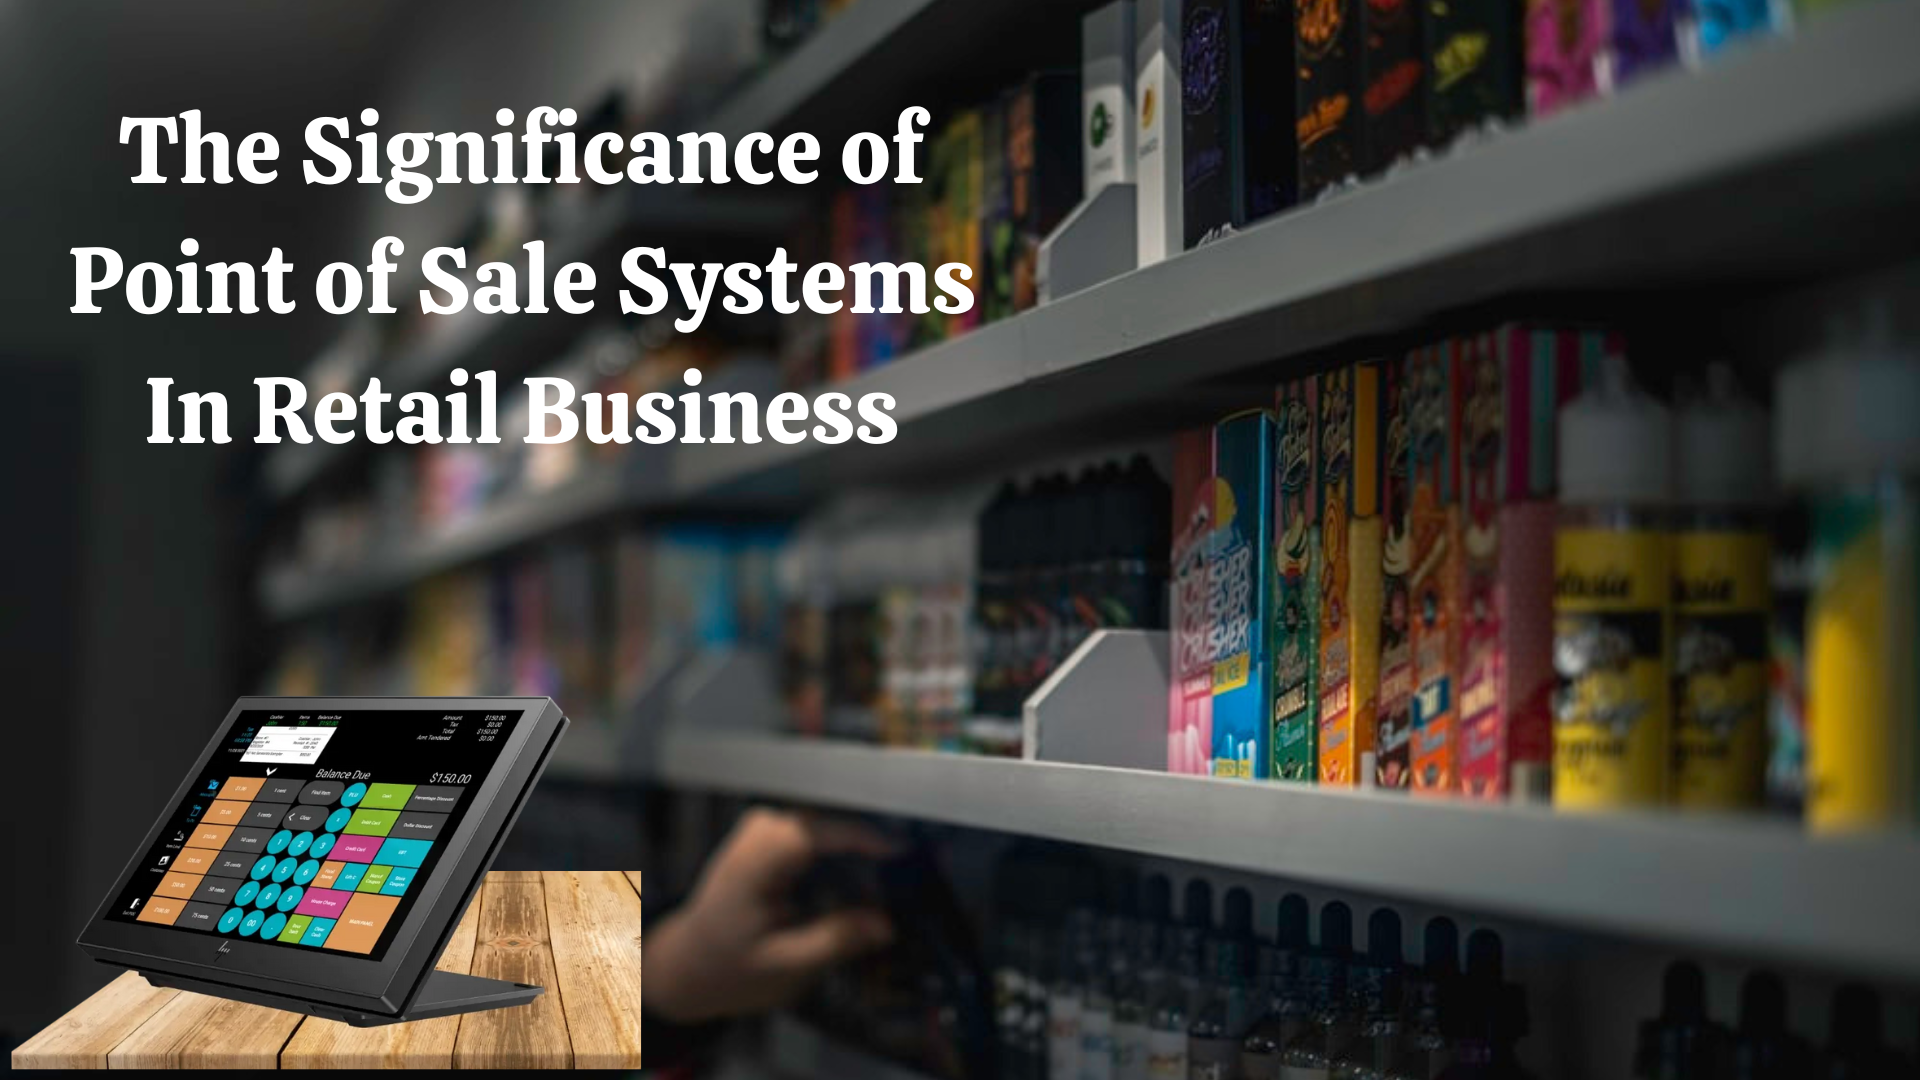 Point of Sale Systems for Retail Business